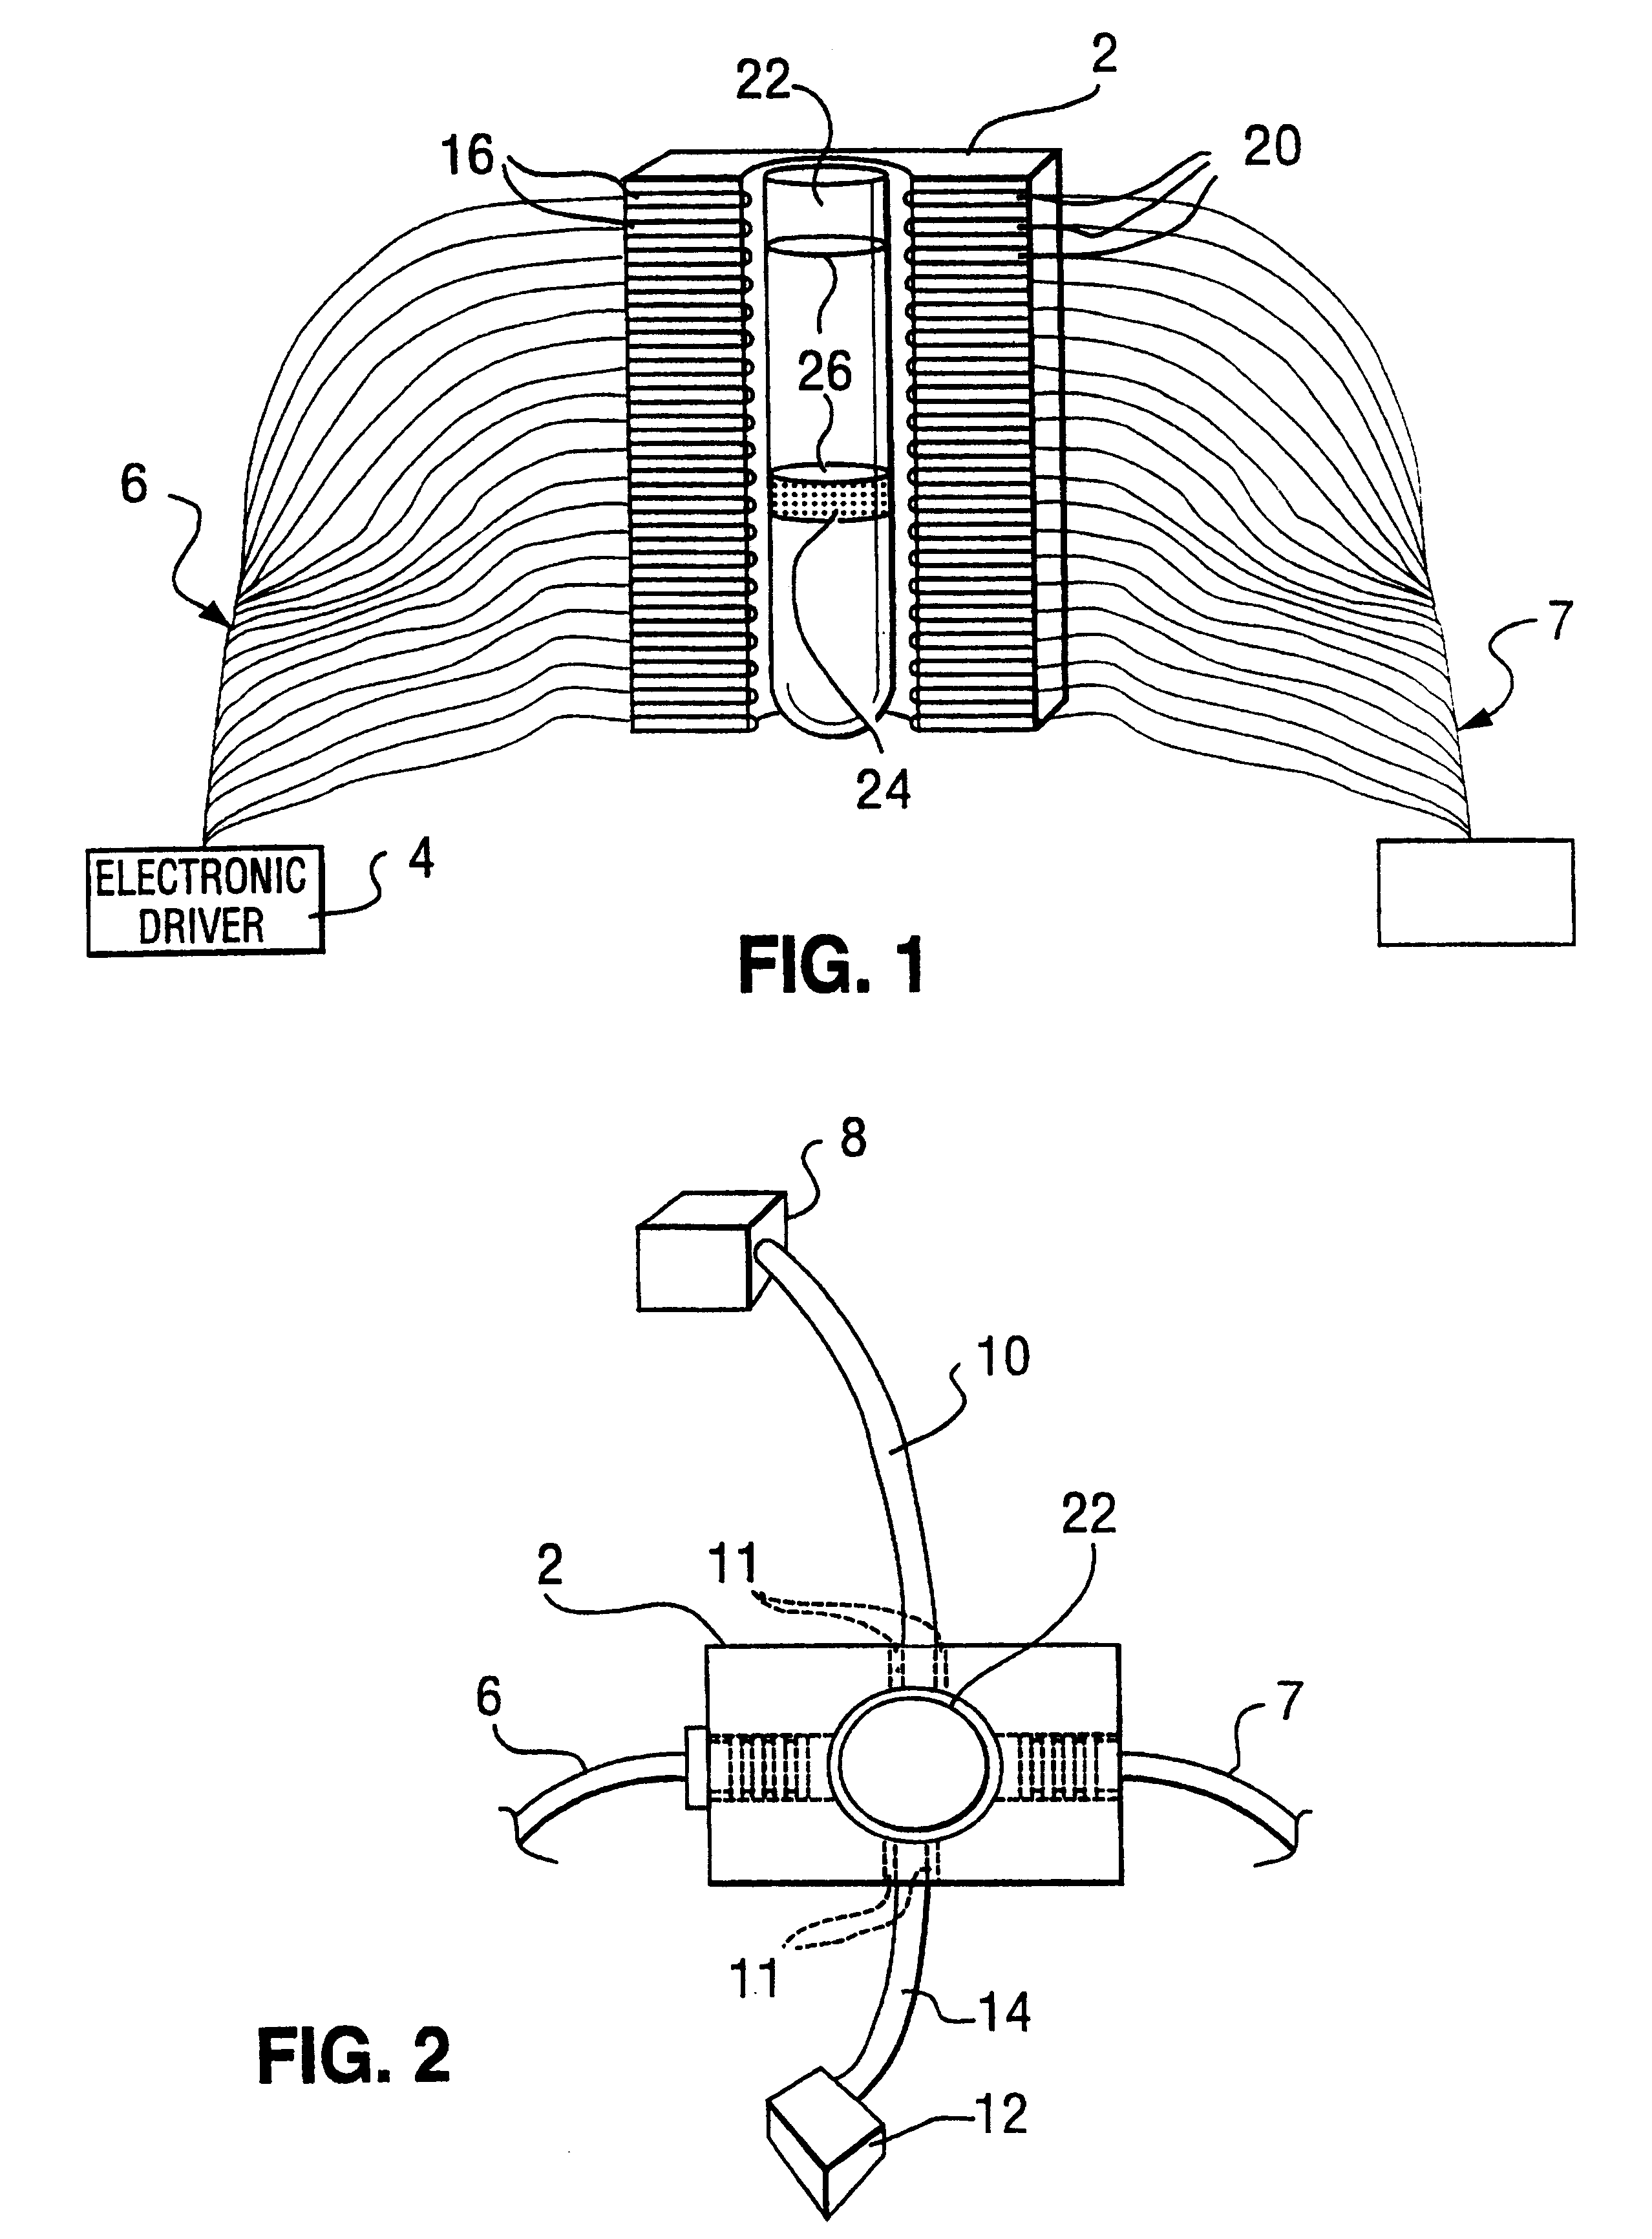 Apparatus and method for rapid spectrophotometric pre-test screen of specimen for a blood analyzer